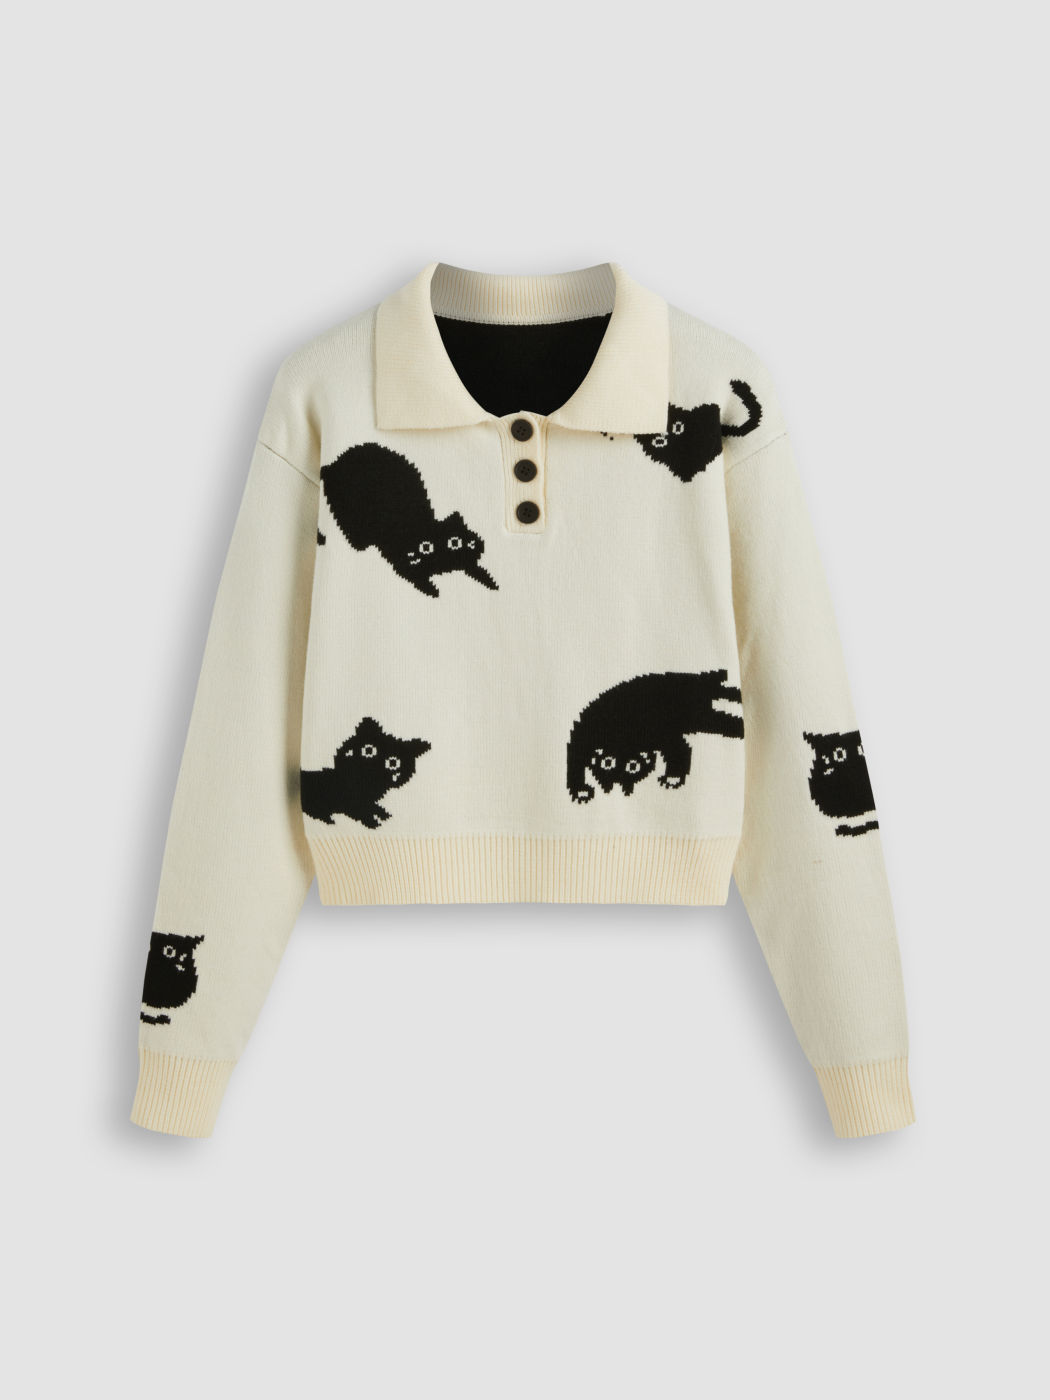 Knit Polo Cat Knitted Long Sleeve Top For Daily Casual School